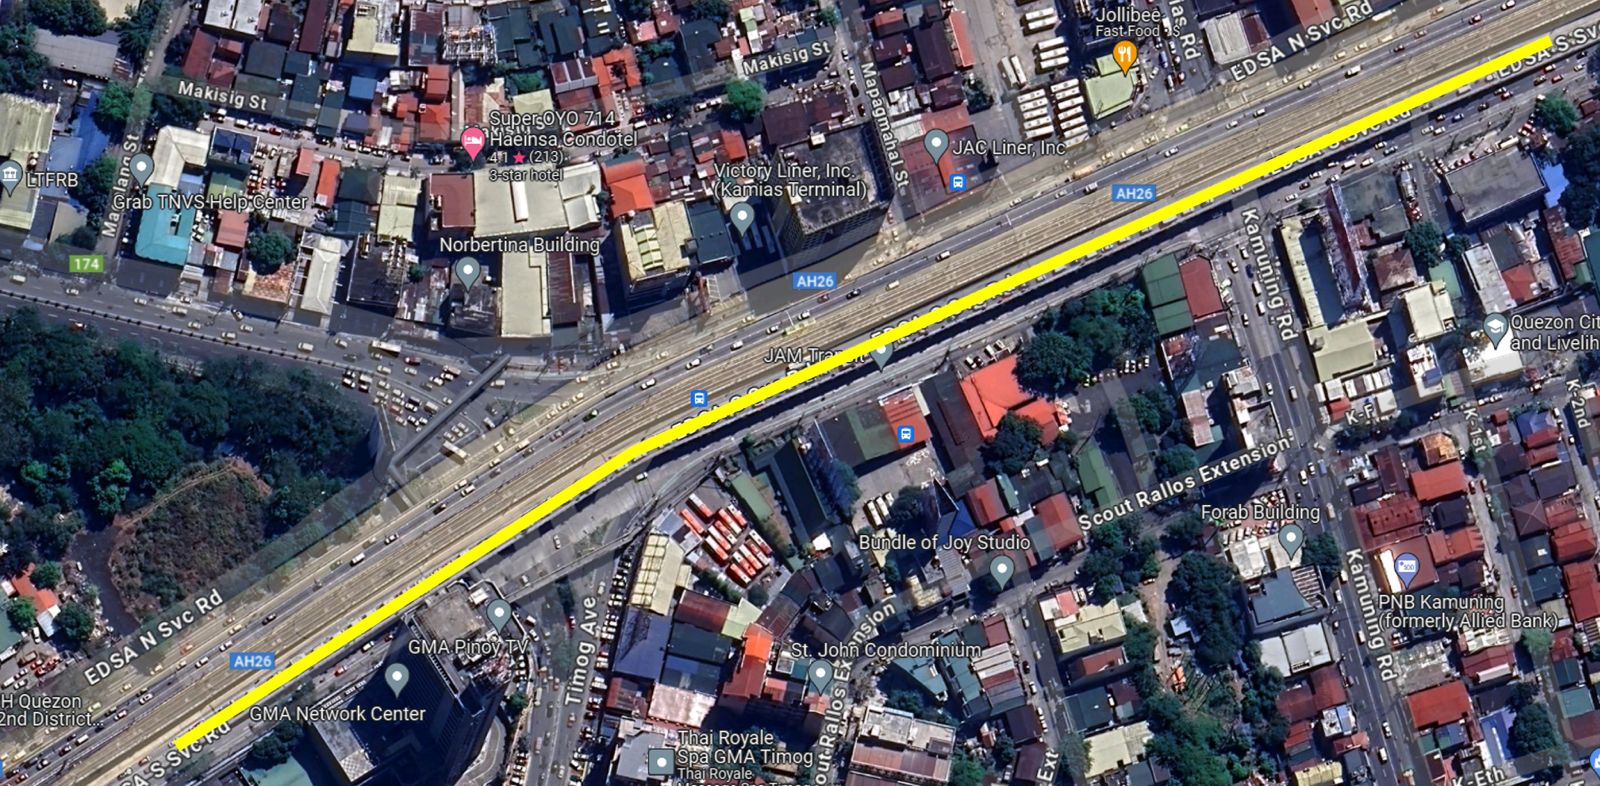 The Department of Public Works and Highways (DPWH) is set to partially close the Edsa-Kamuning southbound flyover in Quezon City starting April 25, to make way for the retrofitting and strengthening of its permanent bridges. The areas highlighted in yellow indicate the parts which will be affected by the retrofitting project.